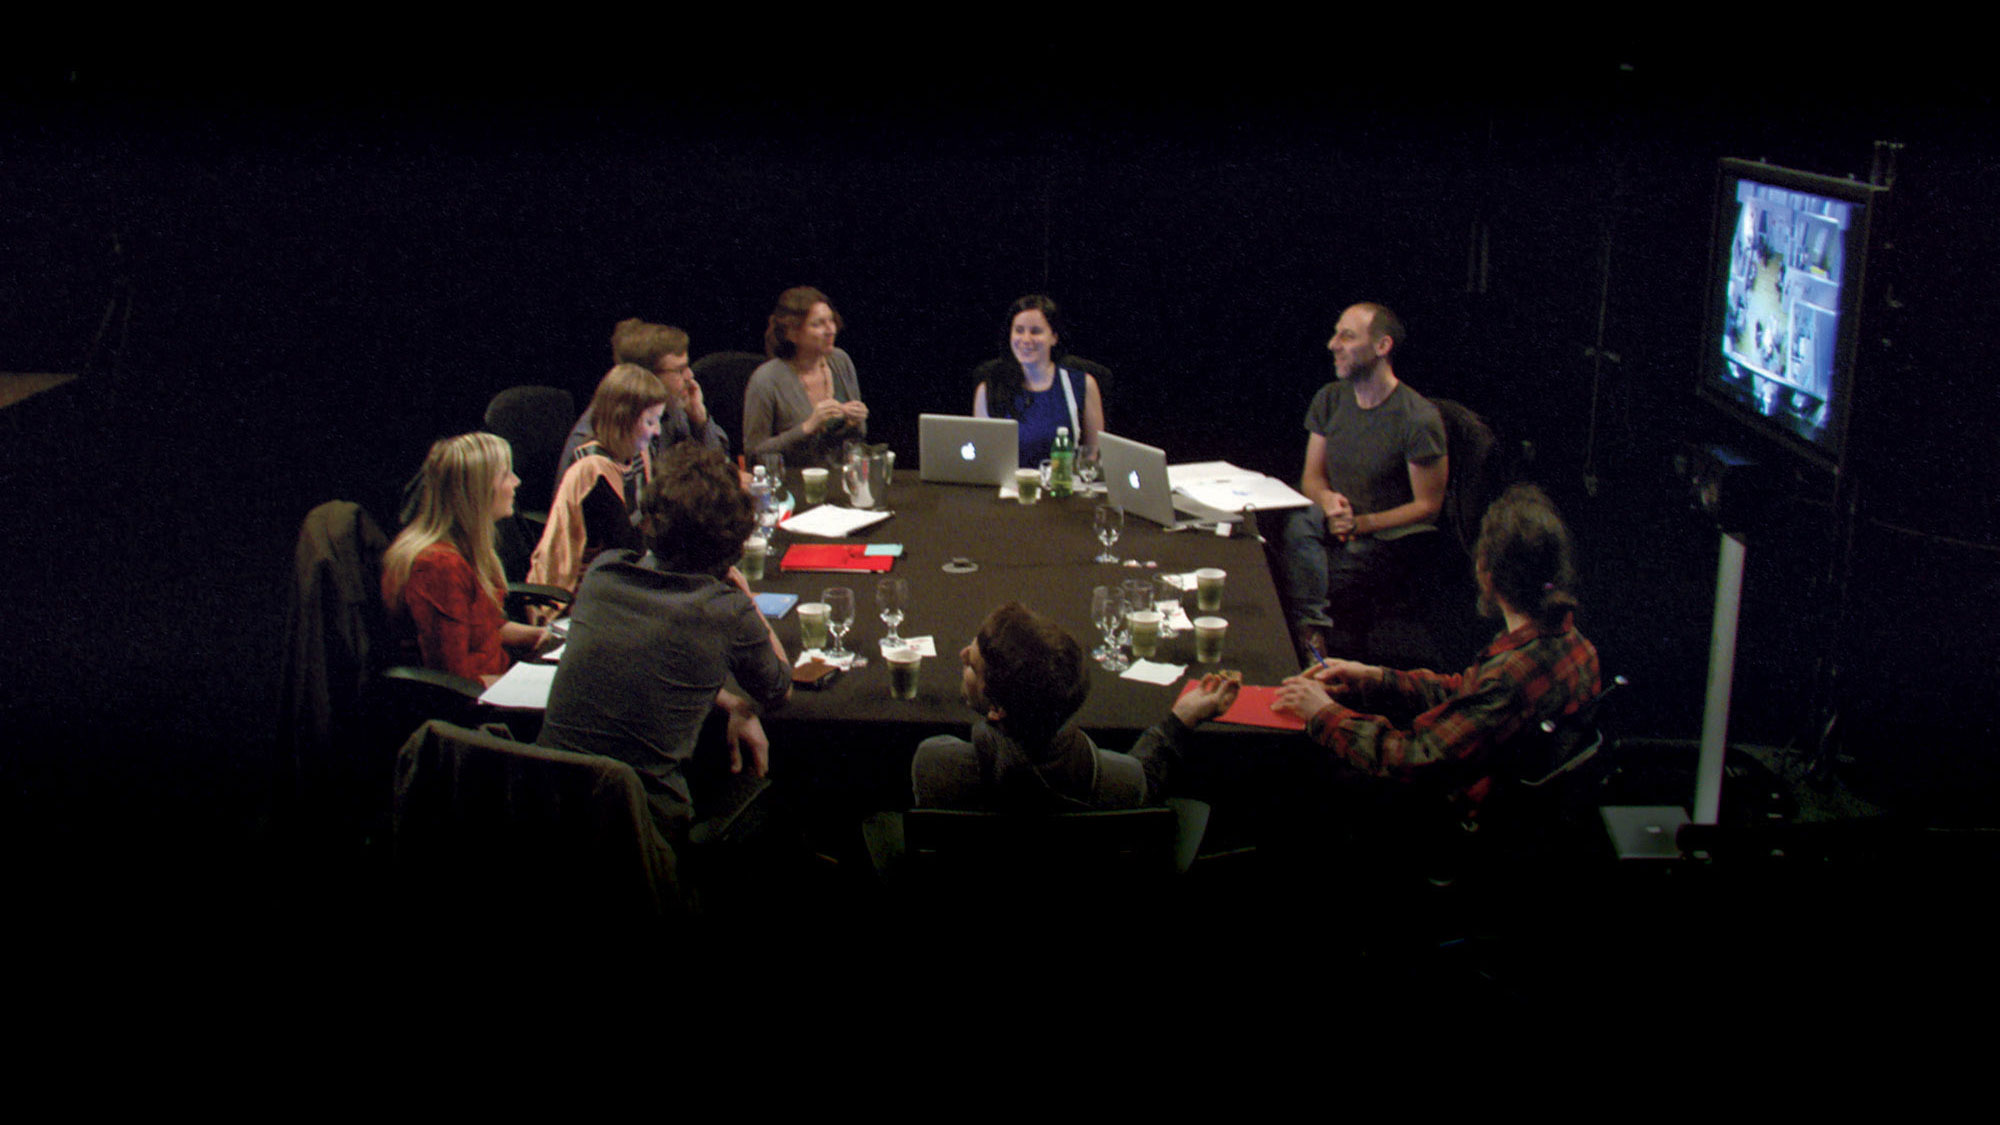 A group of nine people sitting around a conference table in active discussion in a dark room. 